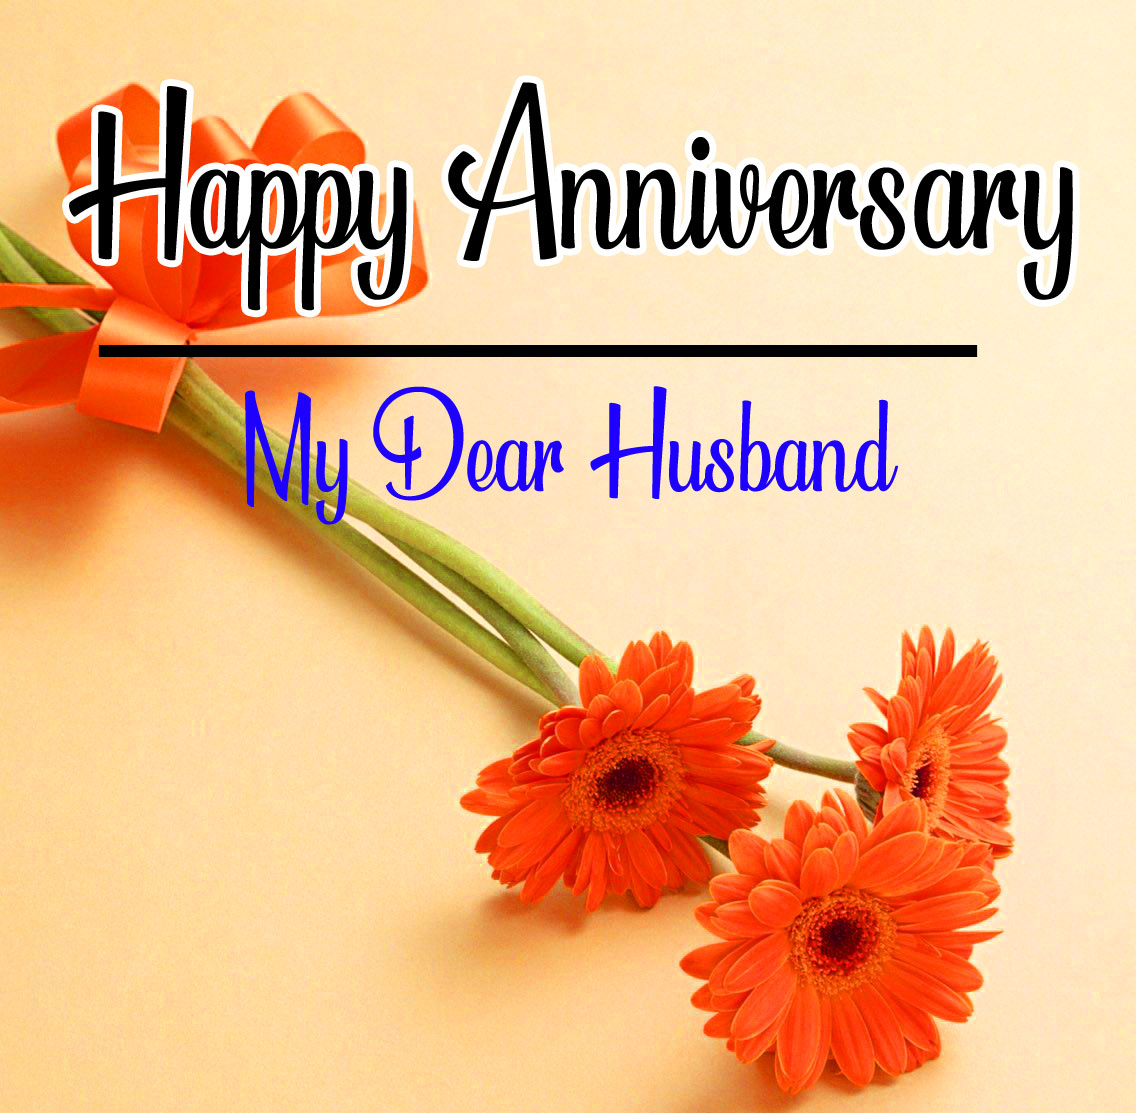 Happy Wedding Anniversary Images (4) – Good Morning Images | Good ...